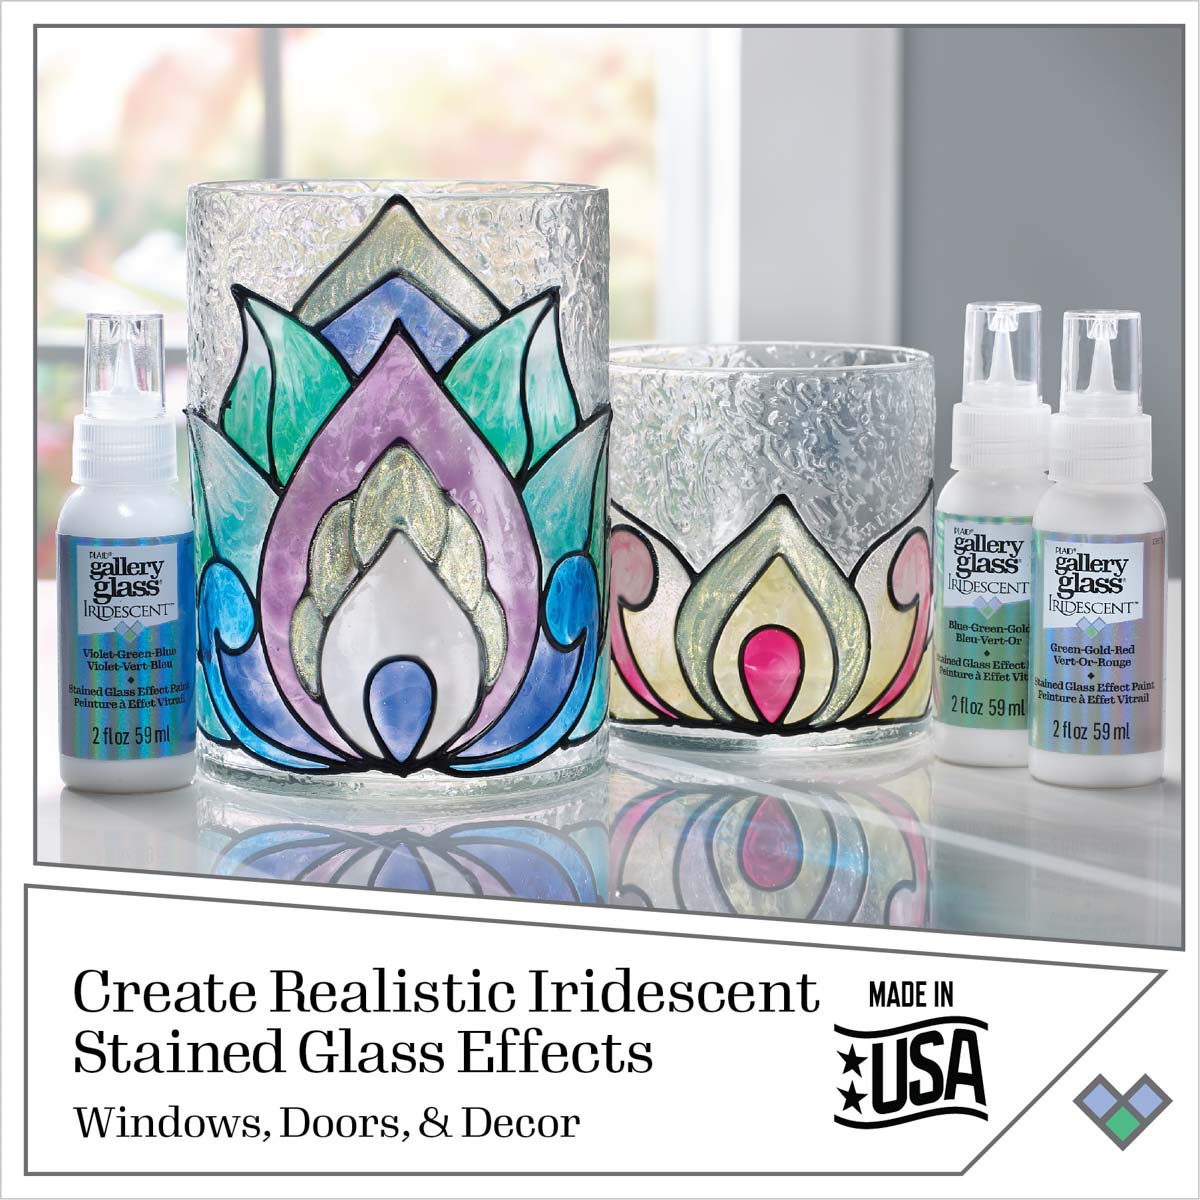 Gallery Glass ® Iridescent™ Stained Glass Effect Paint - Blue-Green-Gold, 2 oz. - 19669